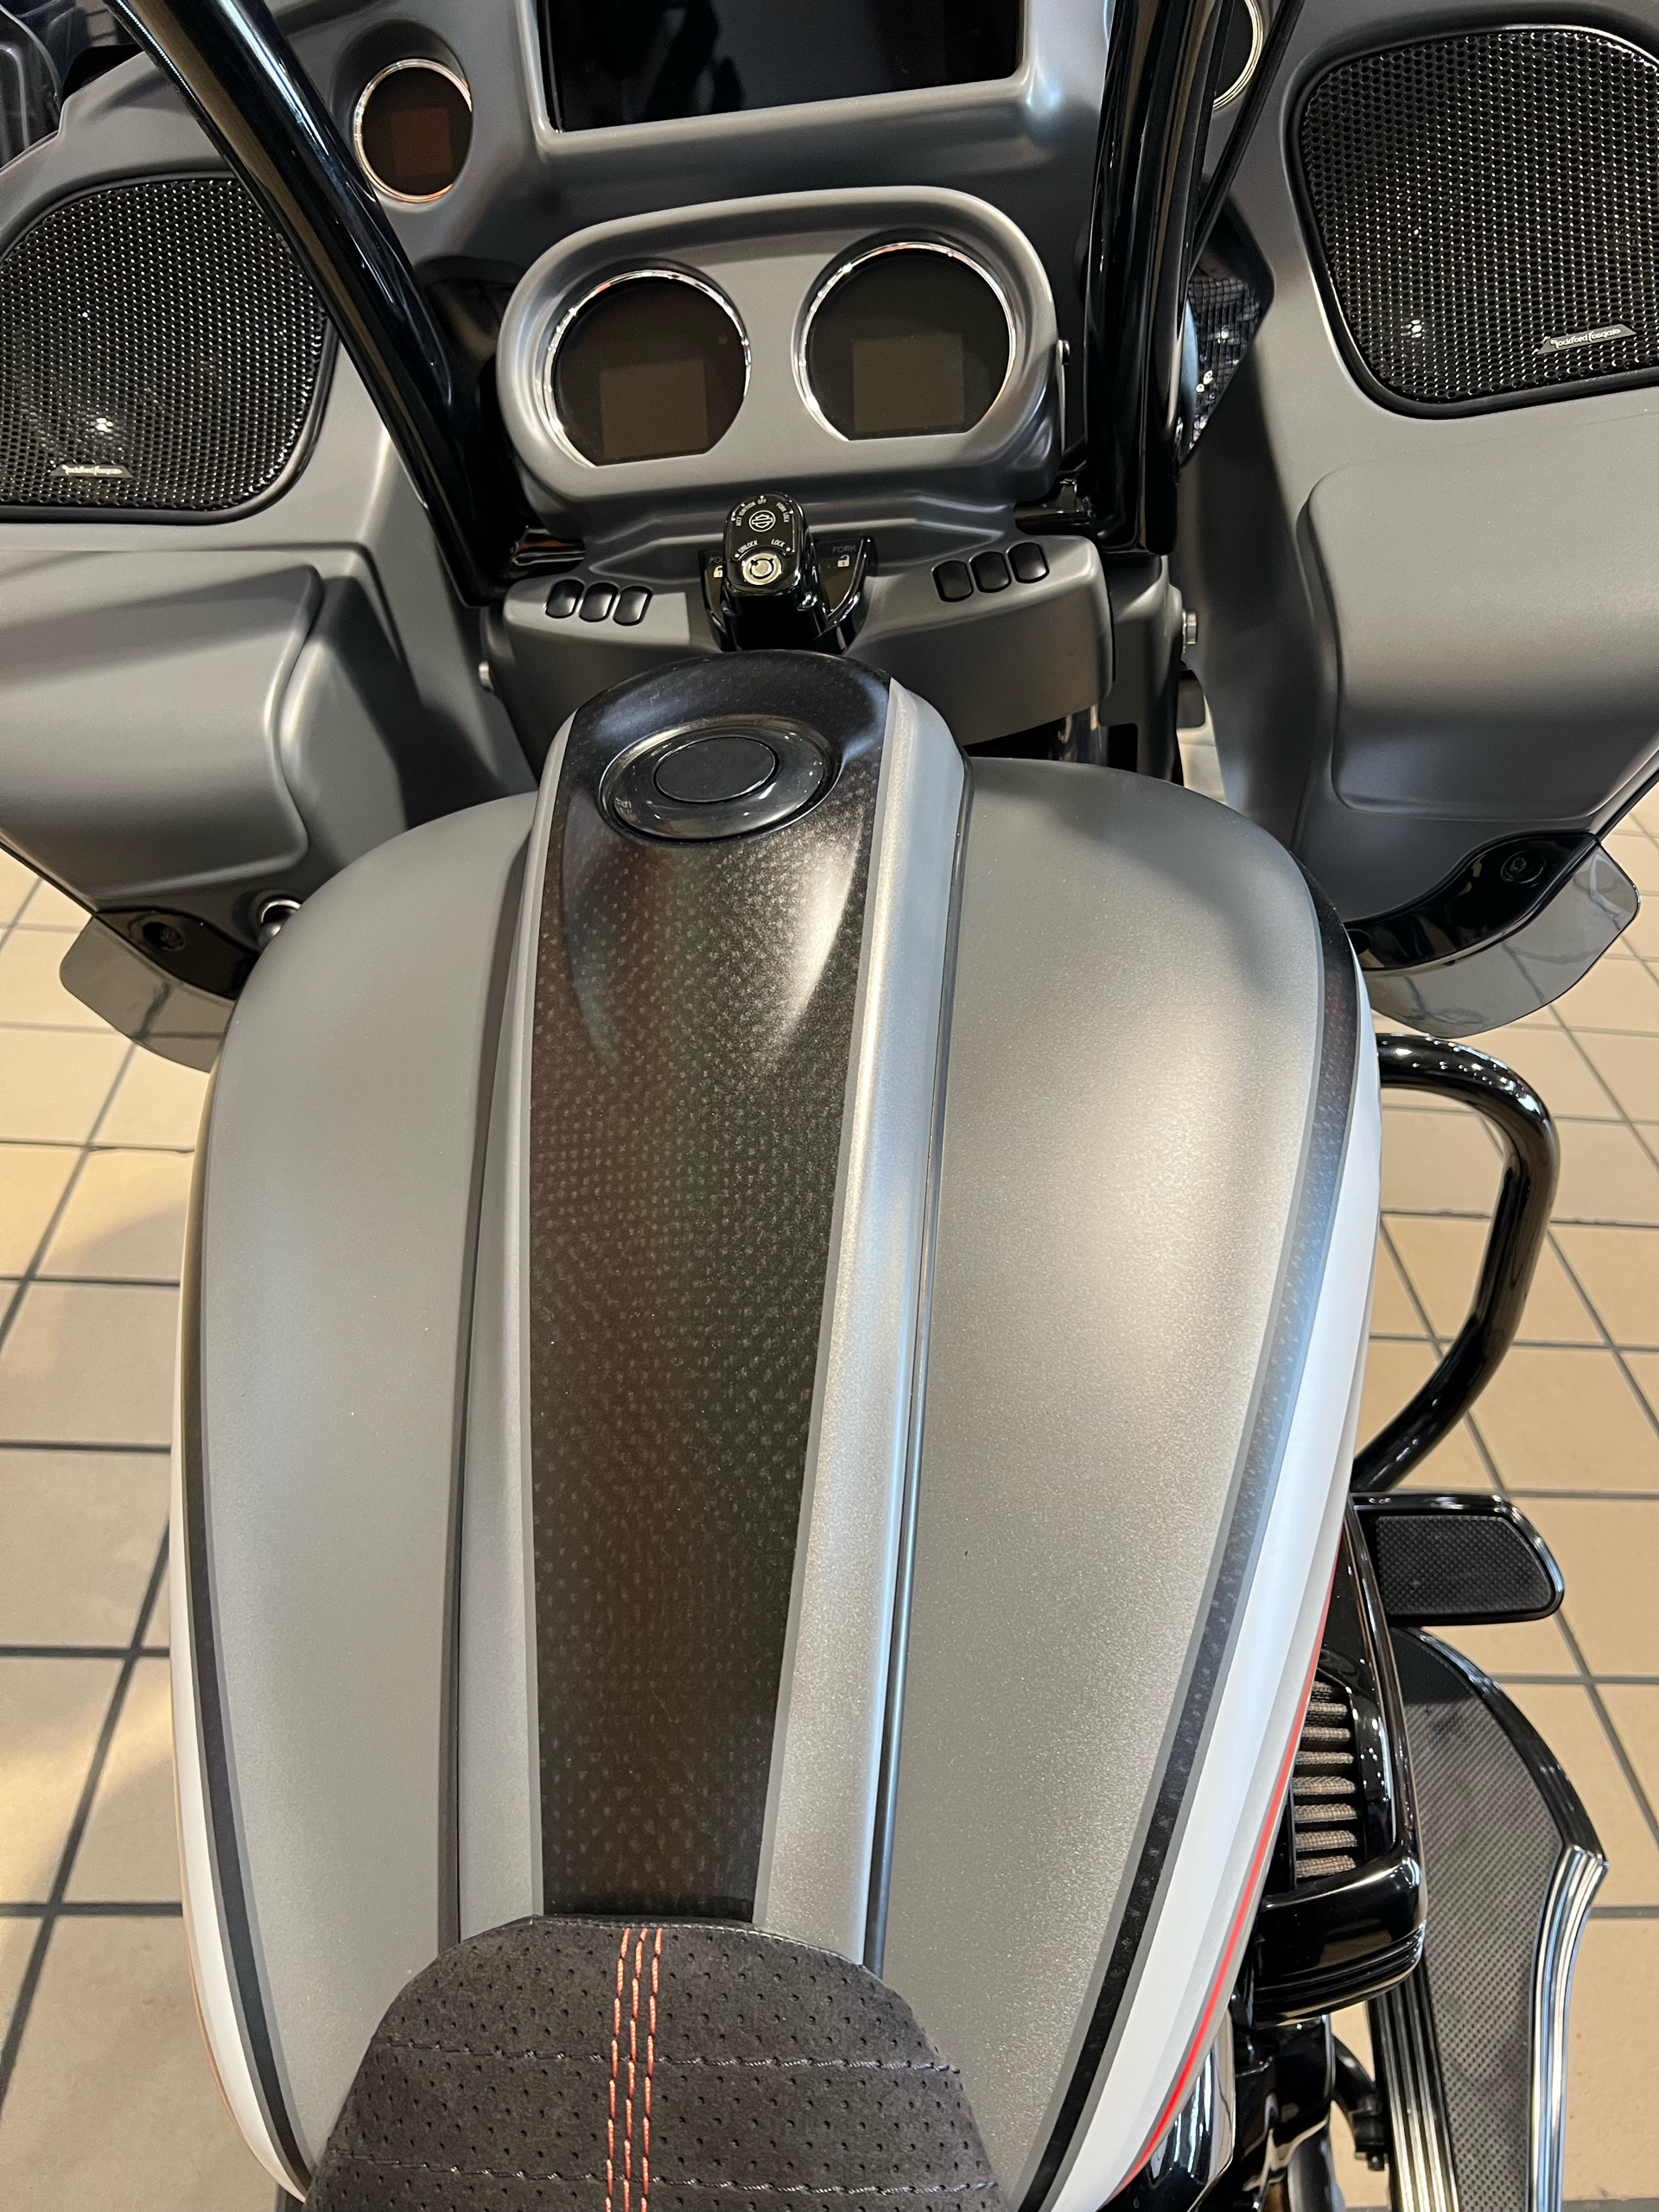 2020 Harley-Davidson ROAD GLIDE SPECIAL in Dumfries, Virginia - Photo 15